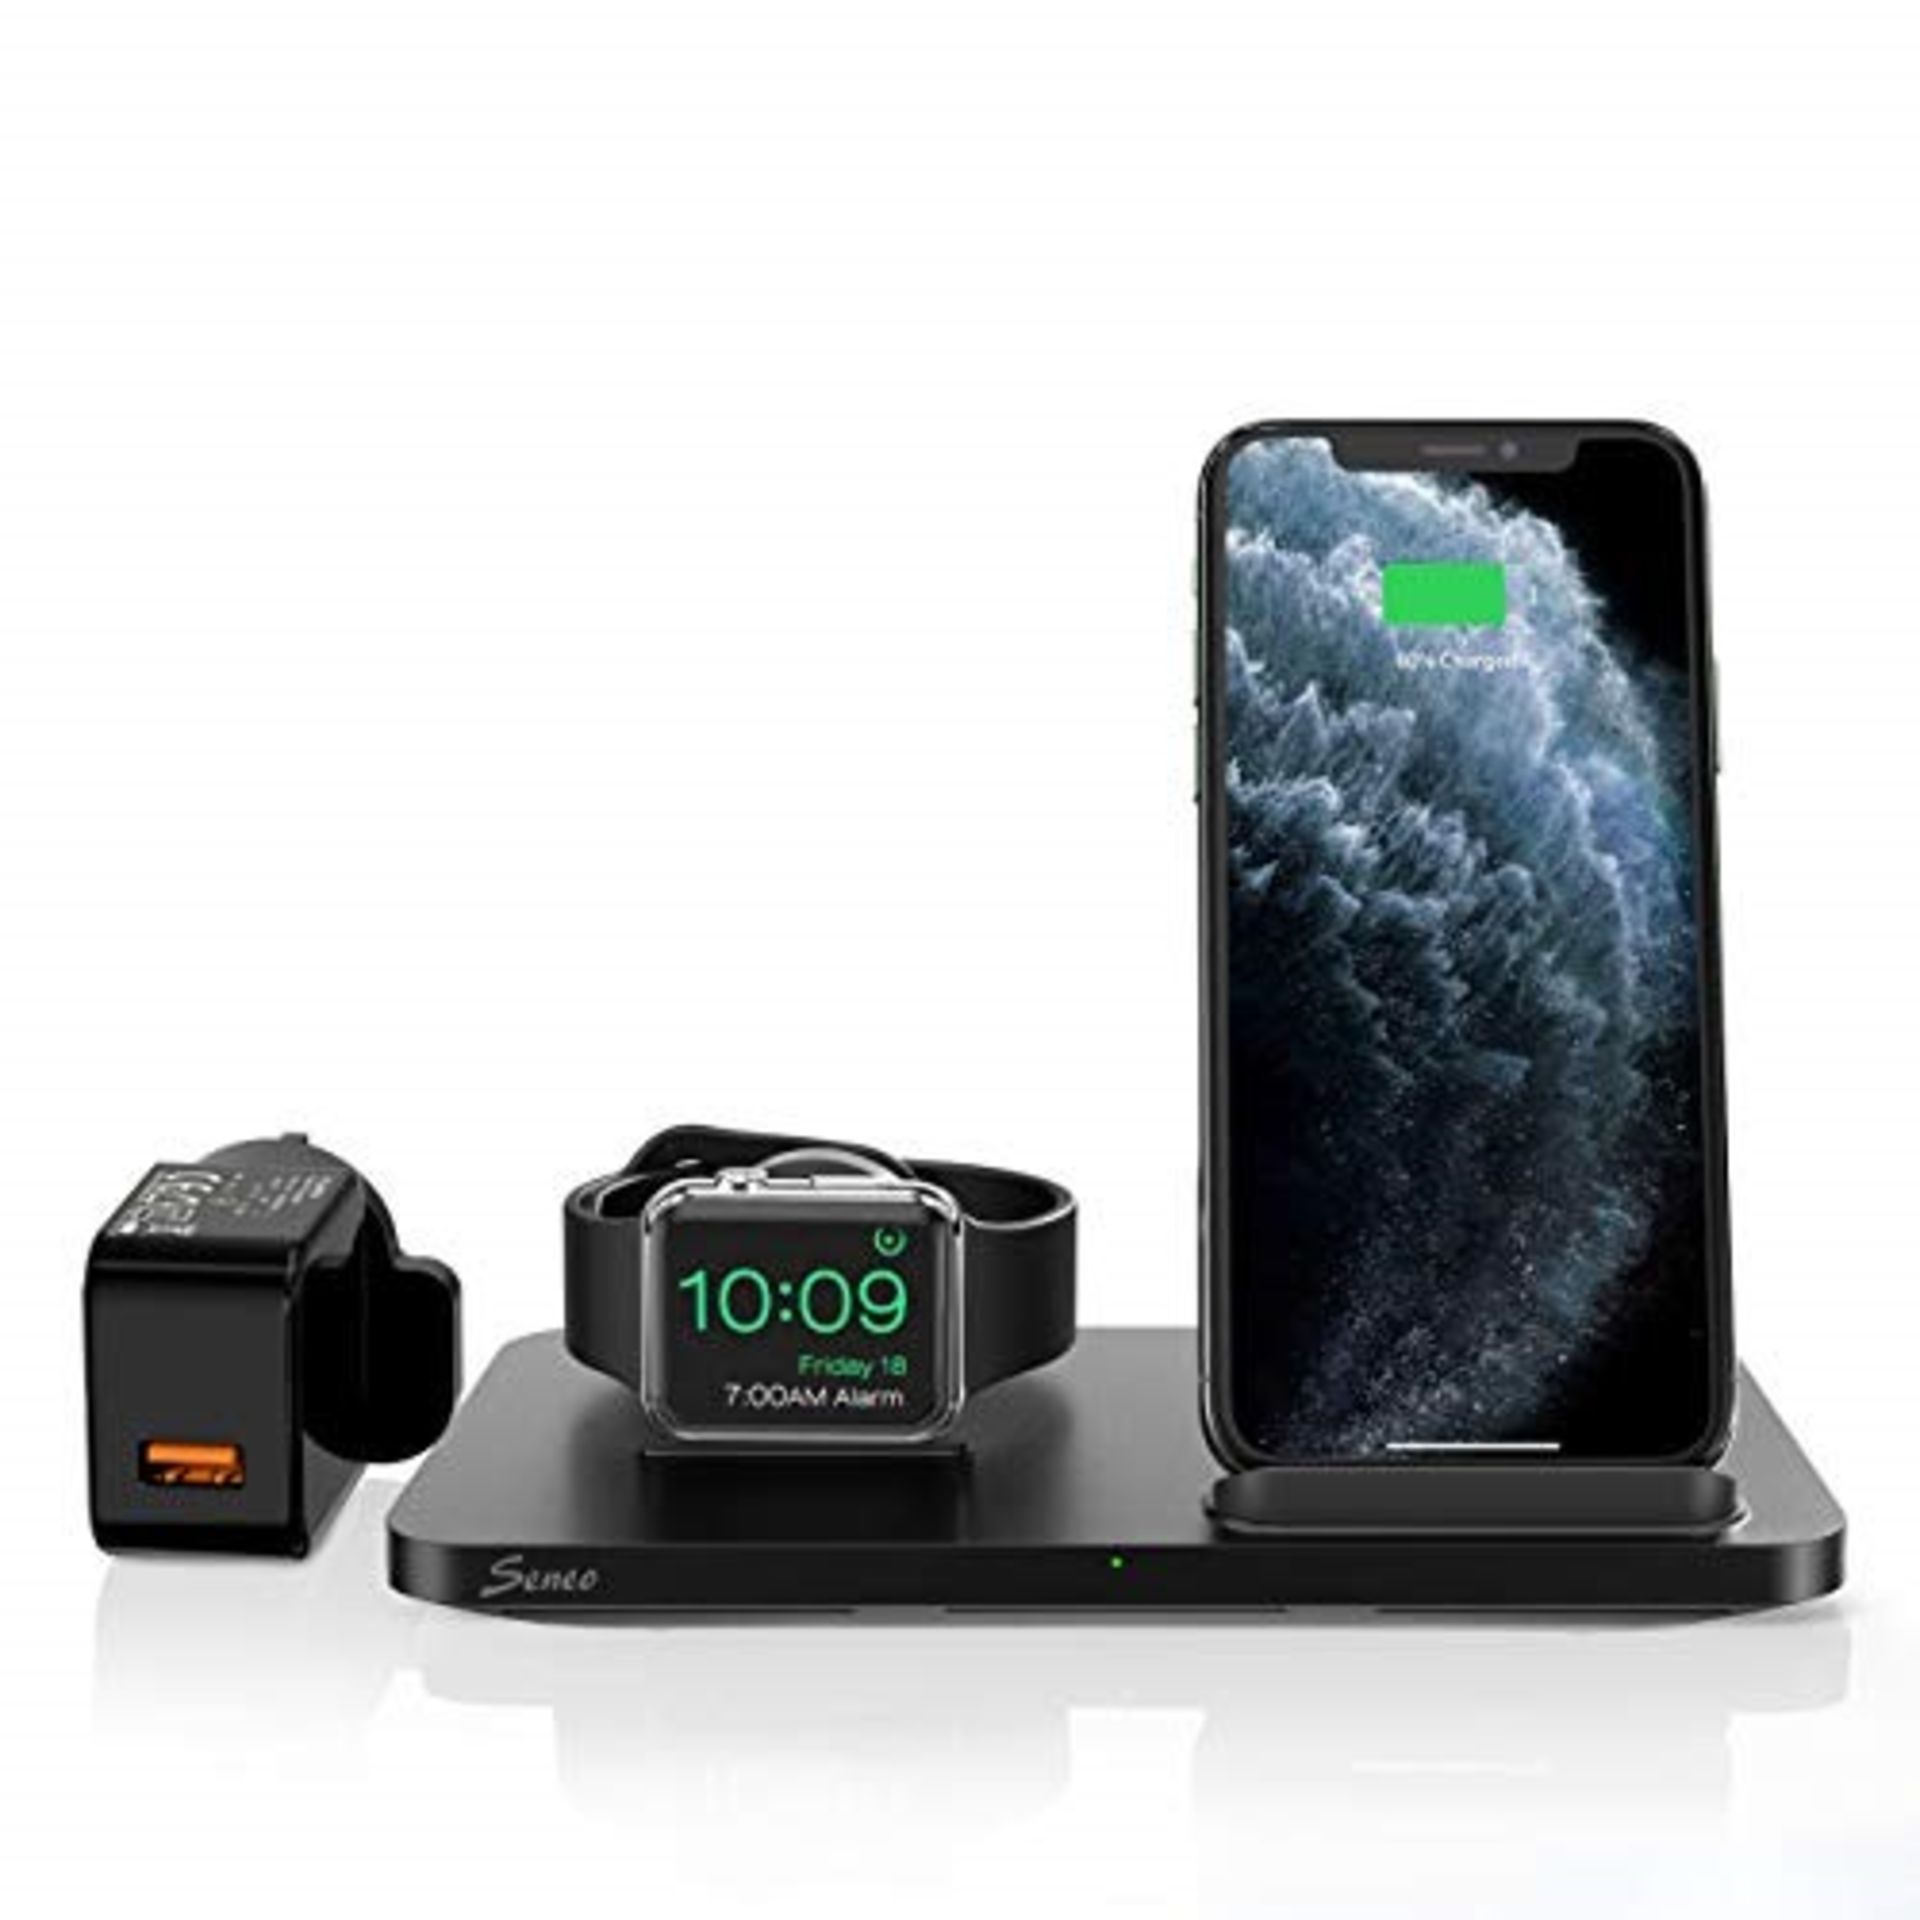 Seneo 2 in 1 Wireless Charger, Apple Watch Charging Stand, Nightstand Mode for iWatch